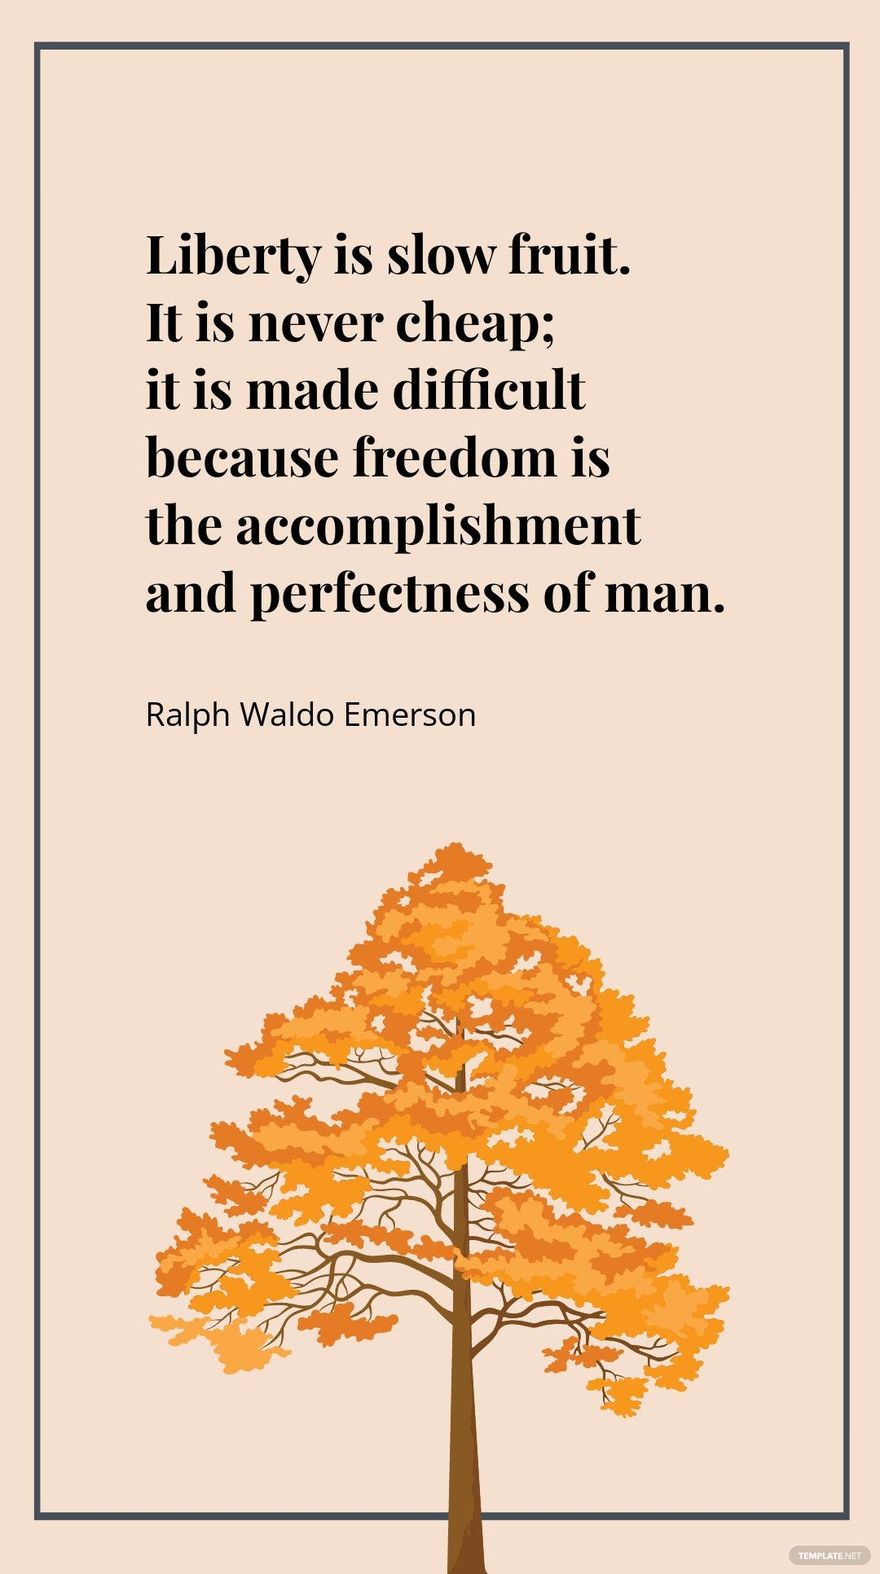 Free Ralph Waldo Emerson - Liberty is slow fruit. It is never cheap; it is made difficult because freedom is the accomplishment and perfectness of man. in JPG